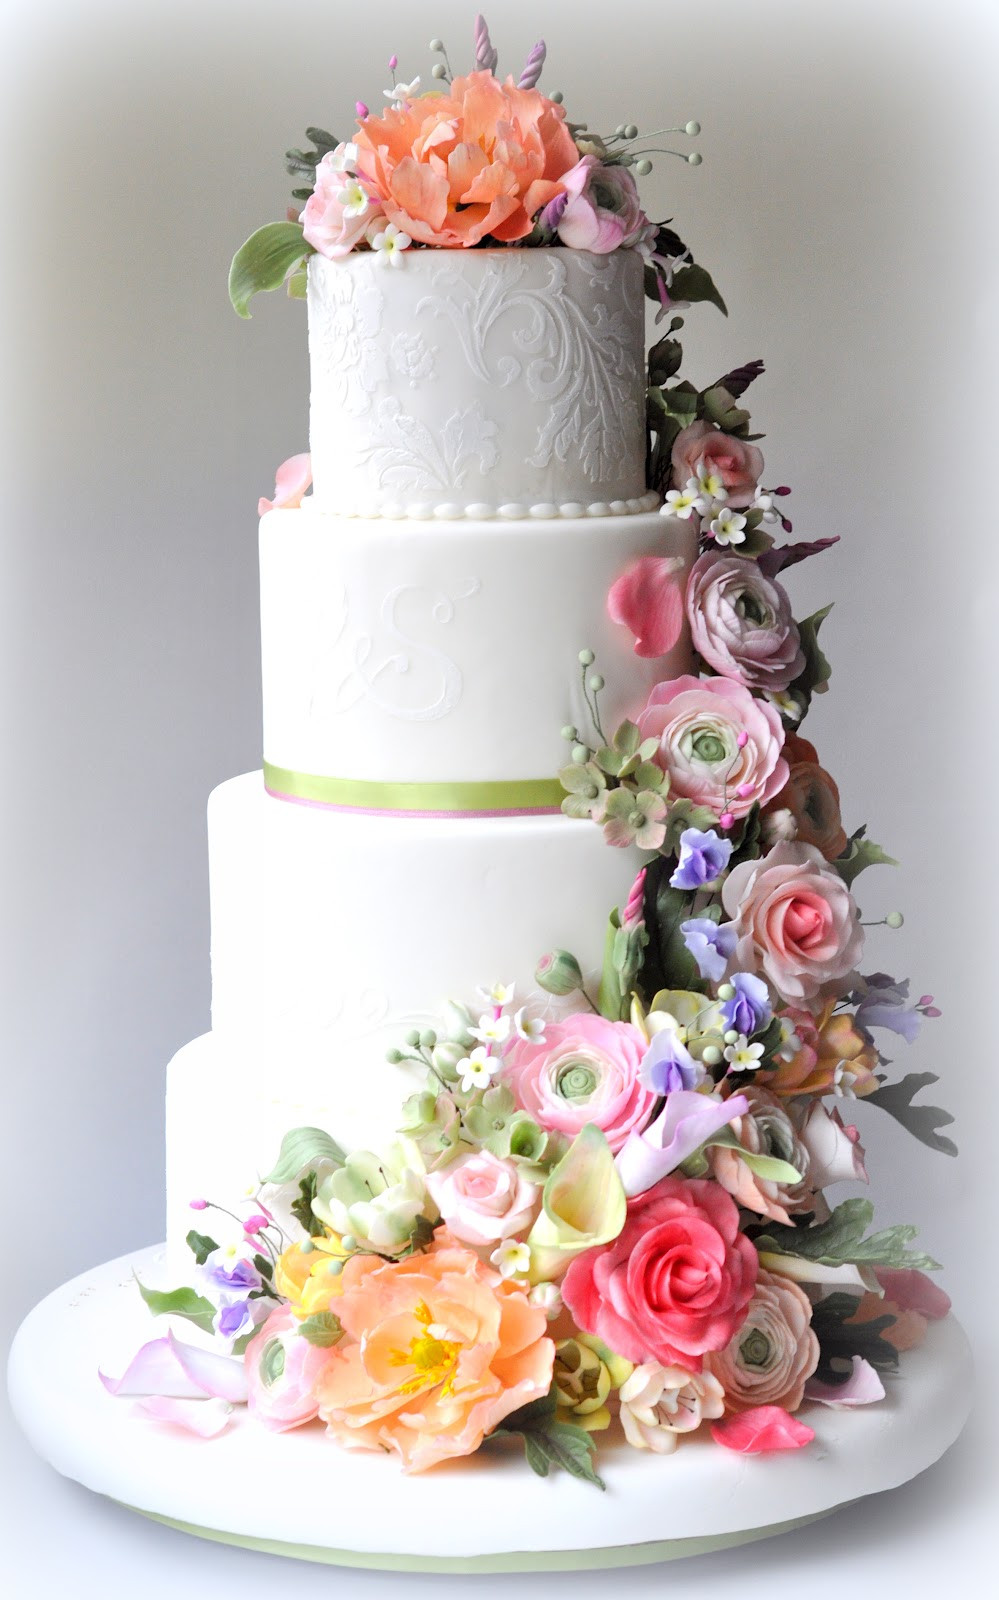 Wedding Cakes Flowers
 7 Gorgeous Reasons to Fall in Love With Spring Weddings